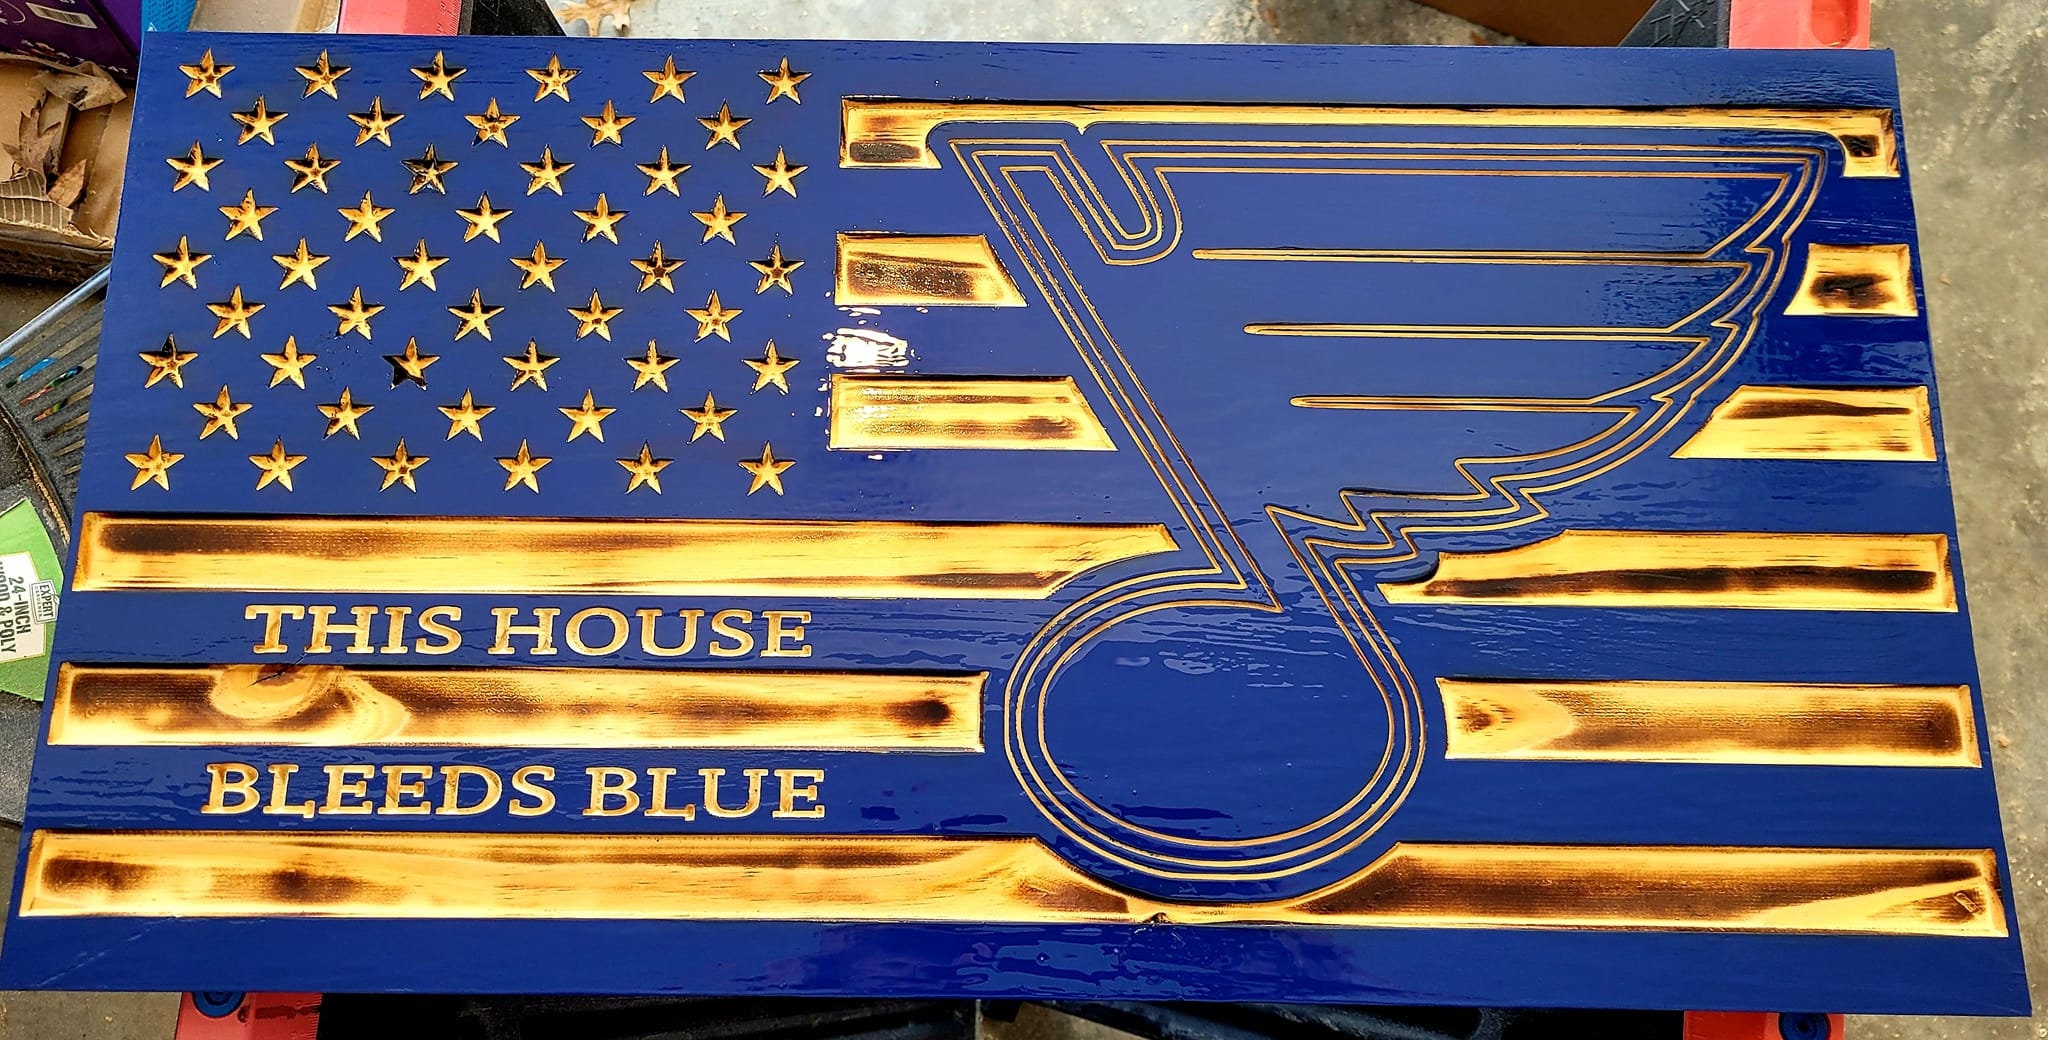 St. Louis Blues Flag - State Street Products